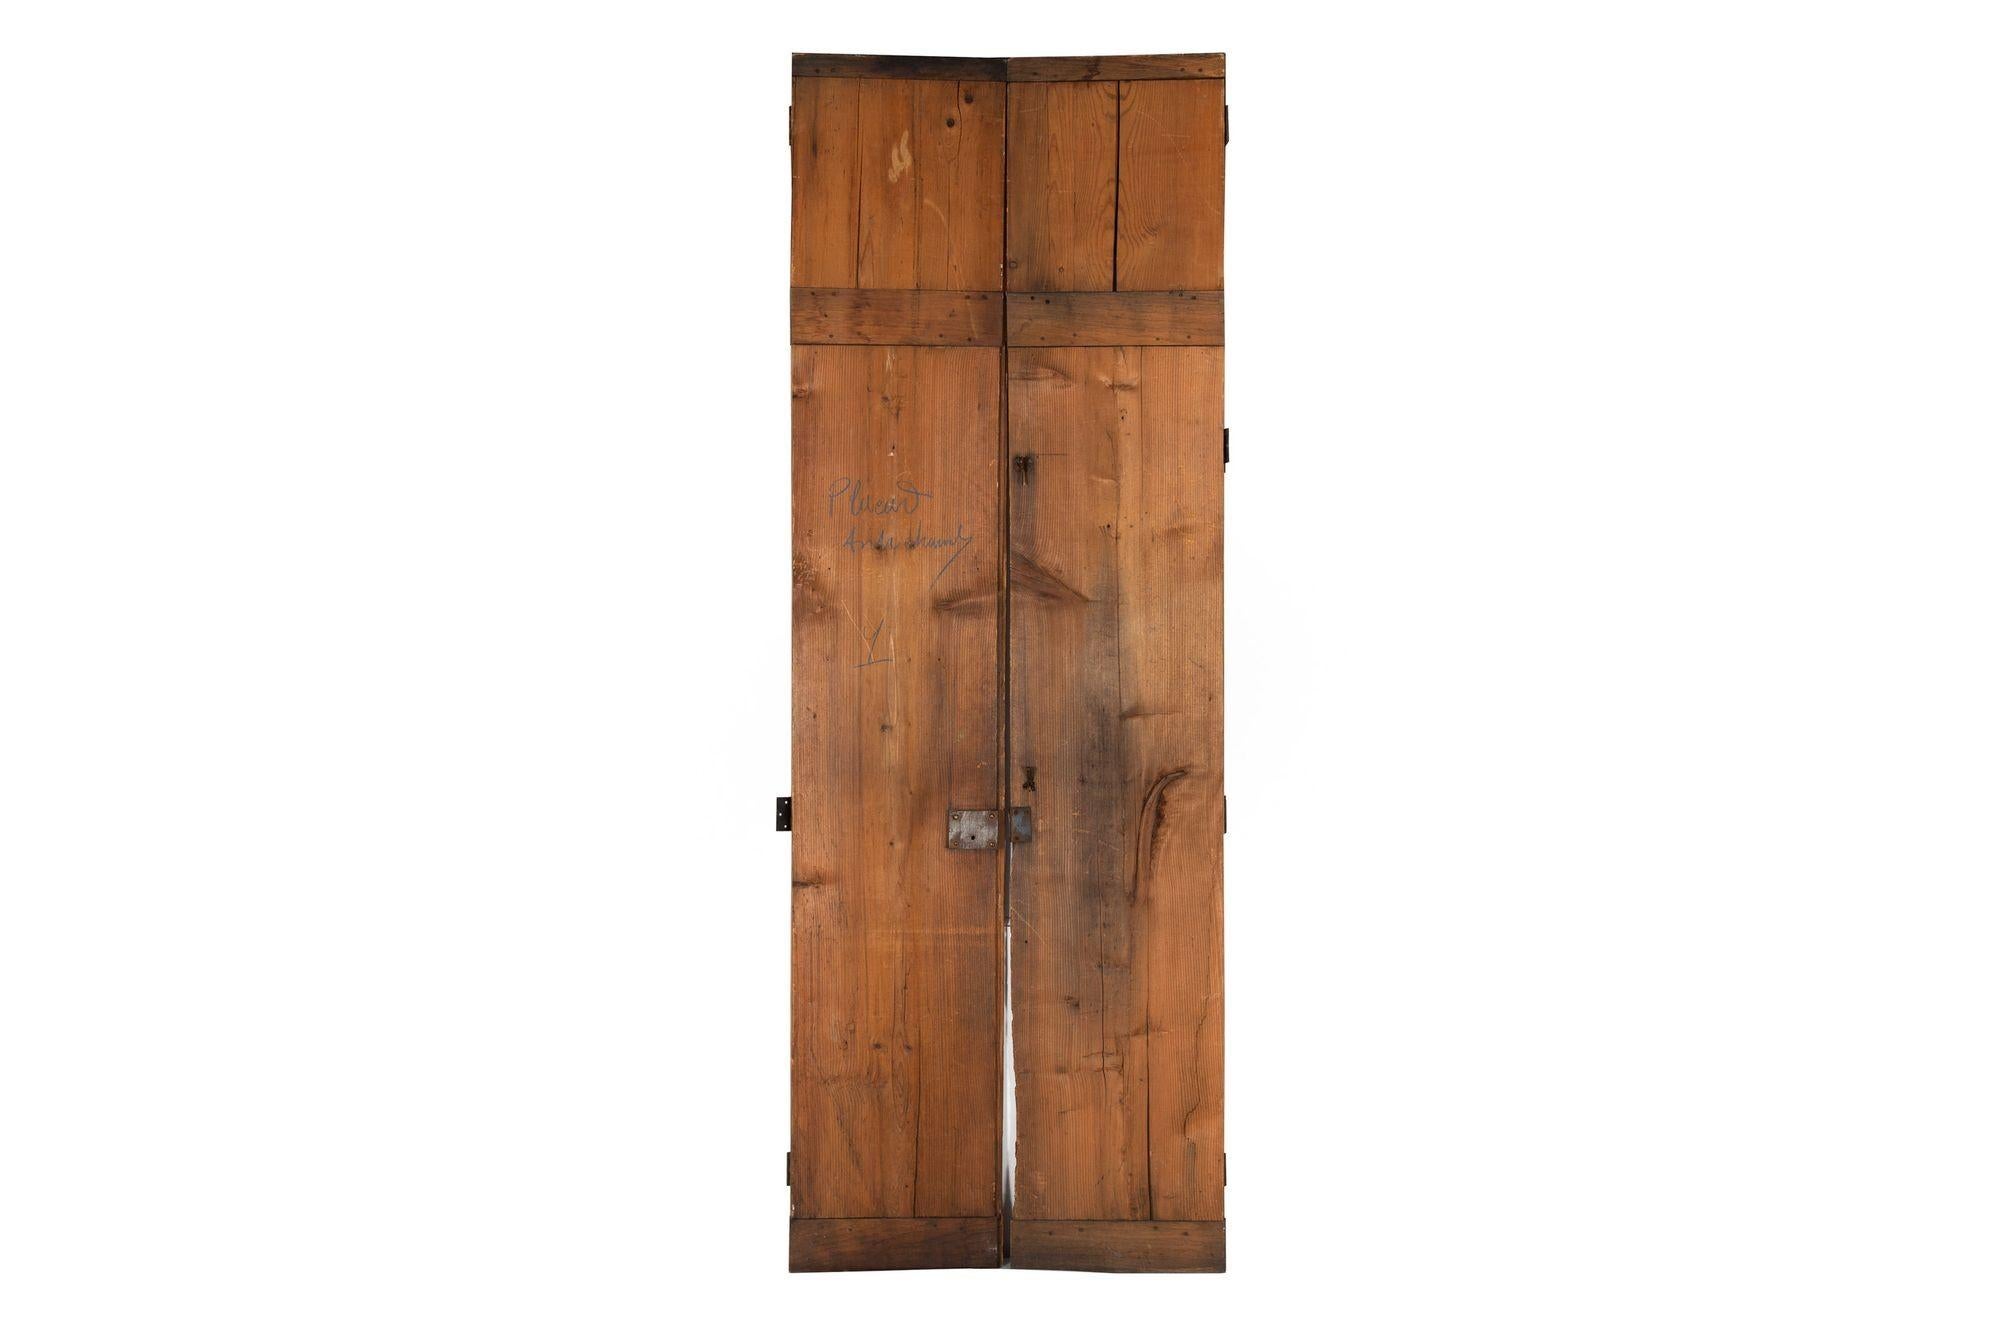 19th Century French Antique Scrubbed Pine Trompe L'oeil Decorated Doors For Sale 4